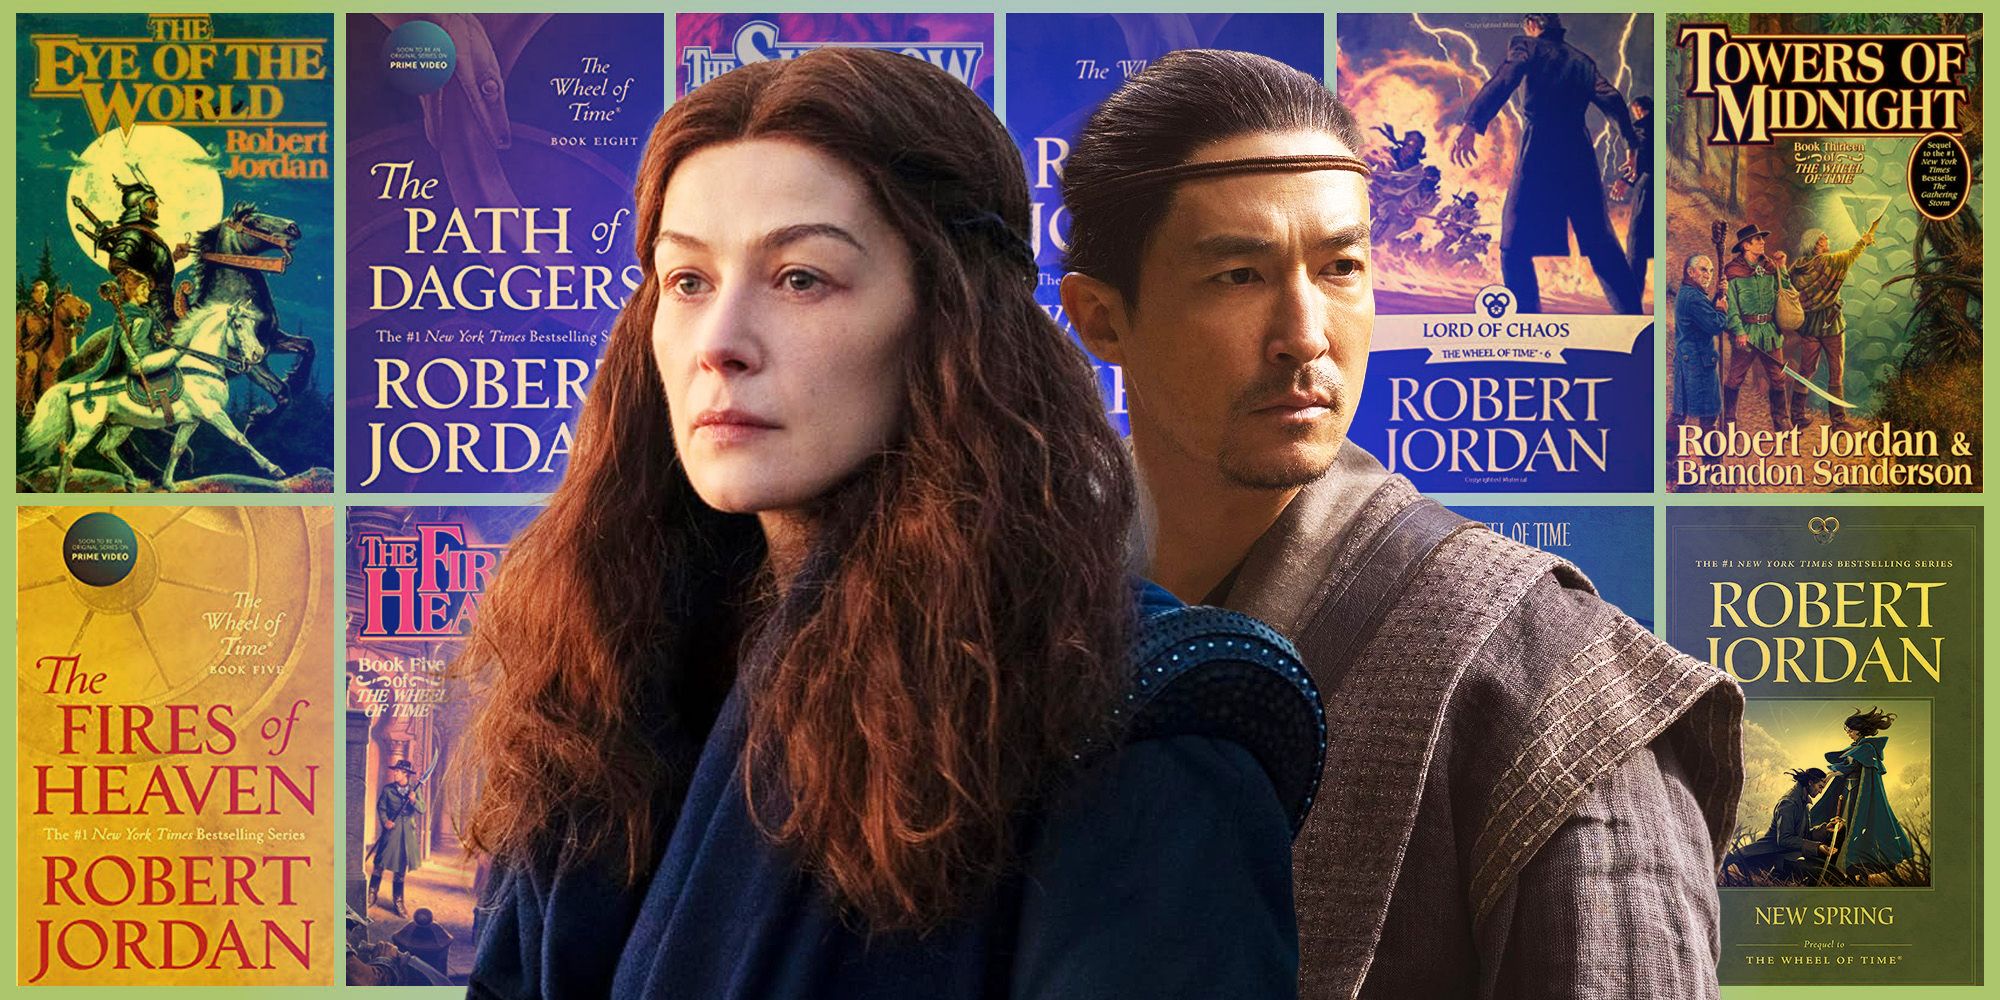 Daniel Henney and Rosemund Pike from The Wheel of Time series